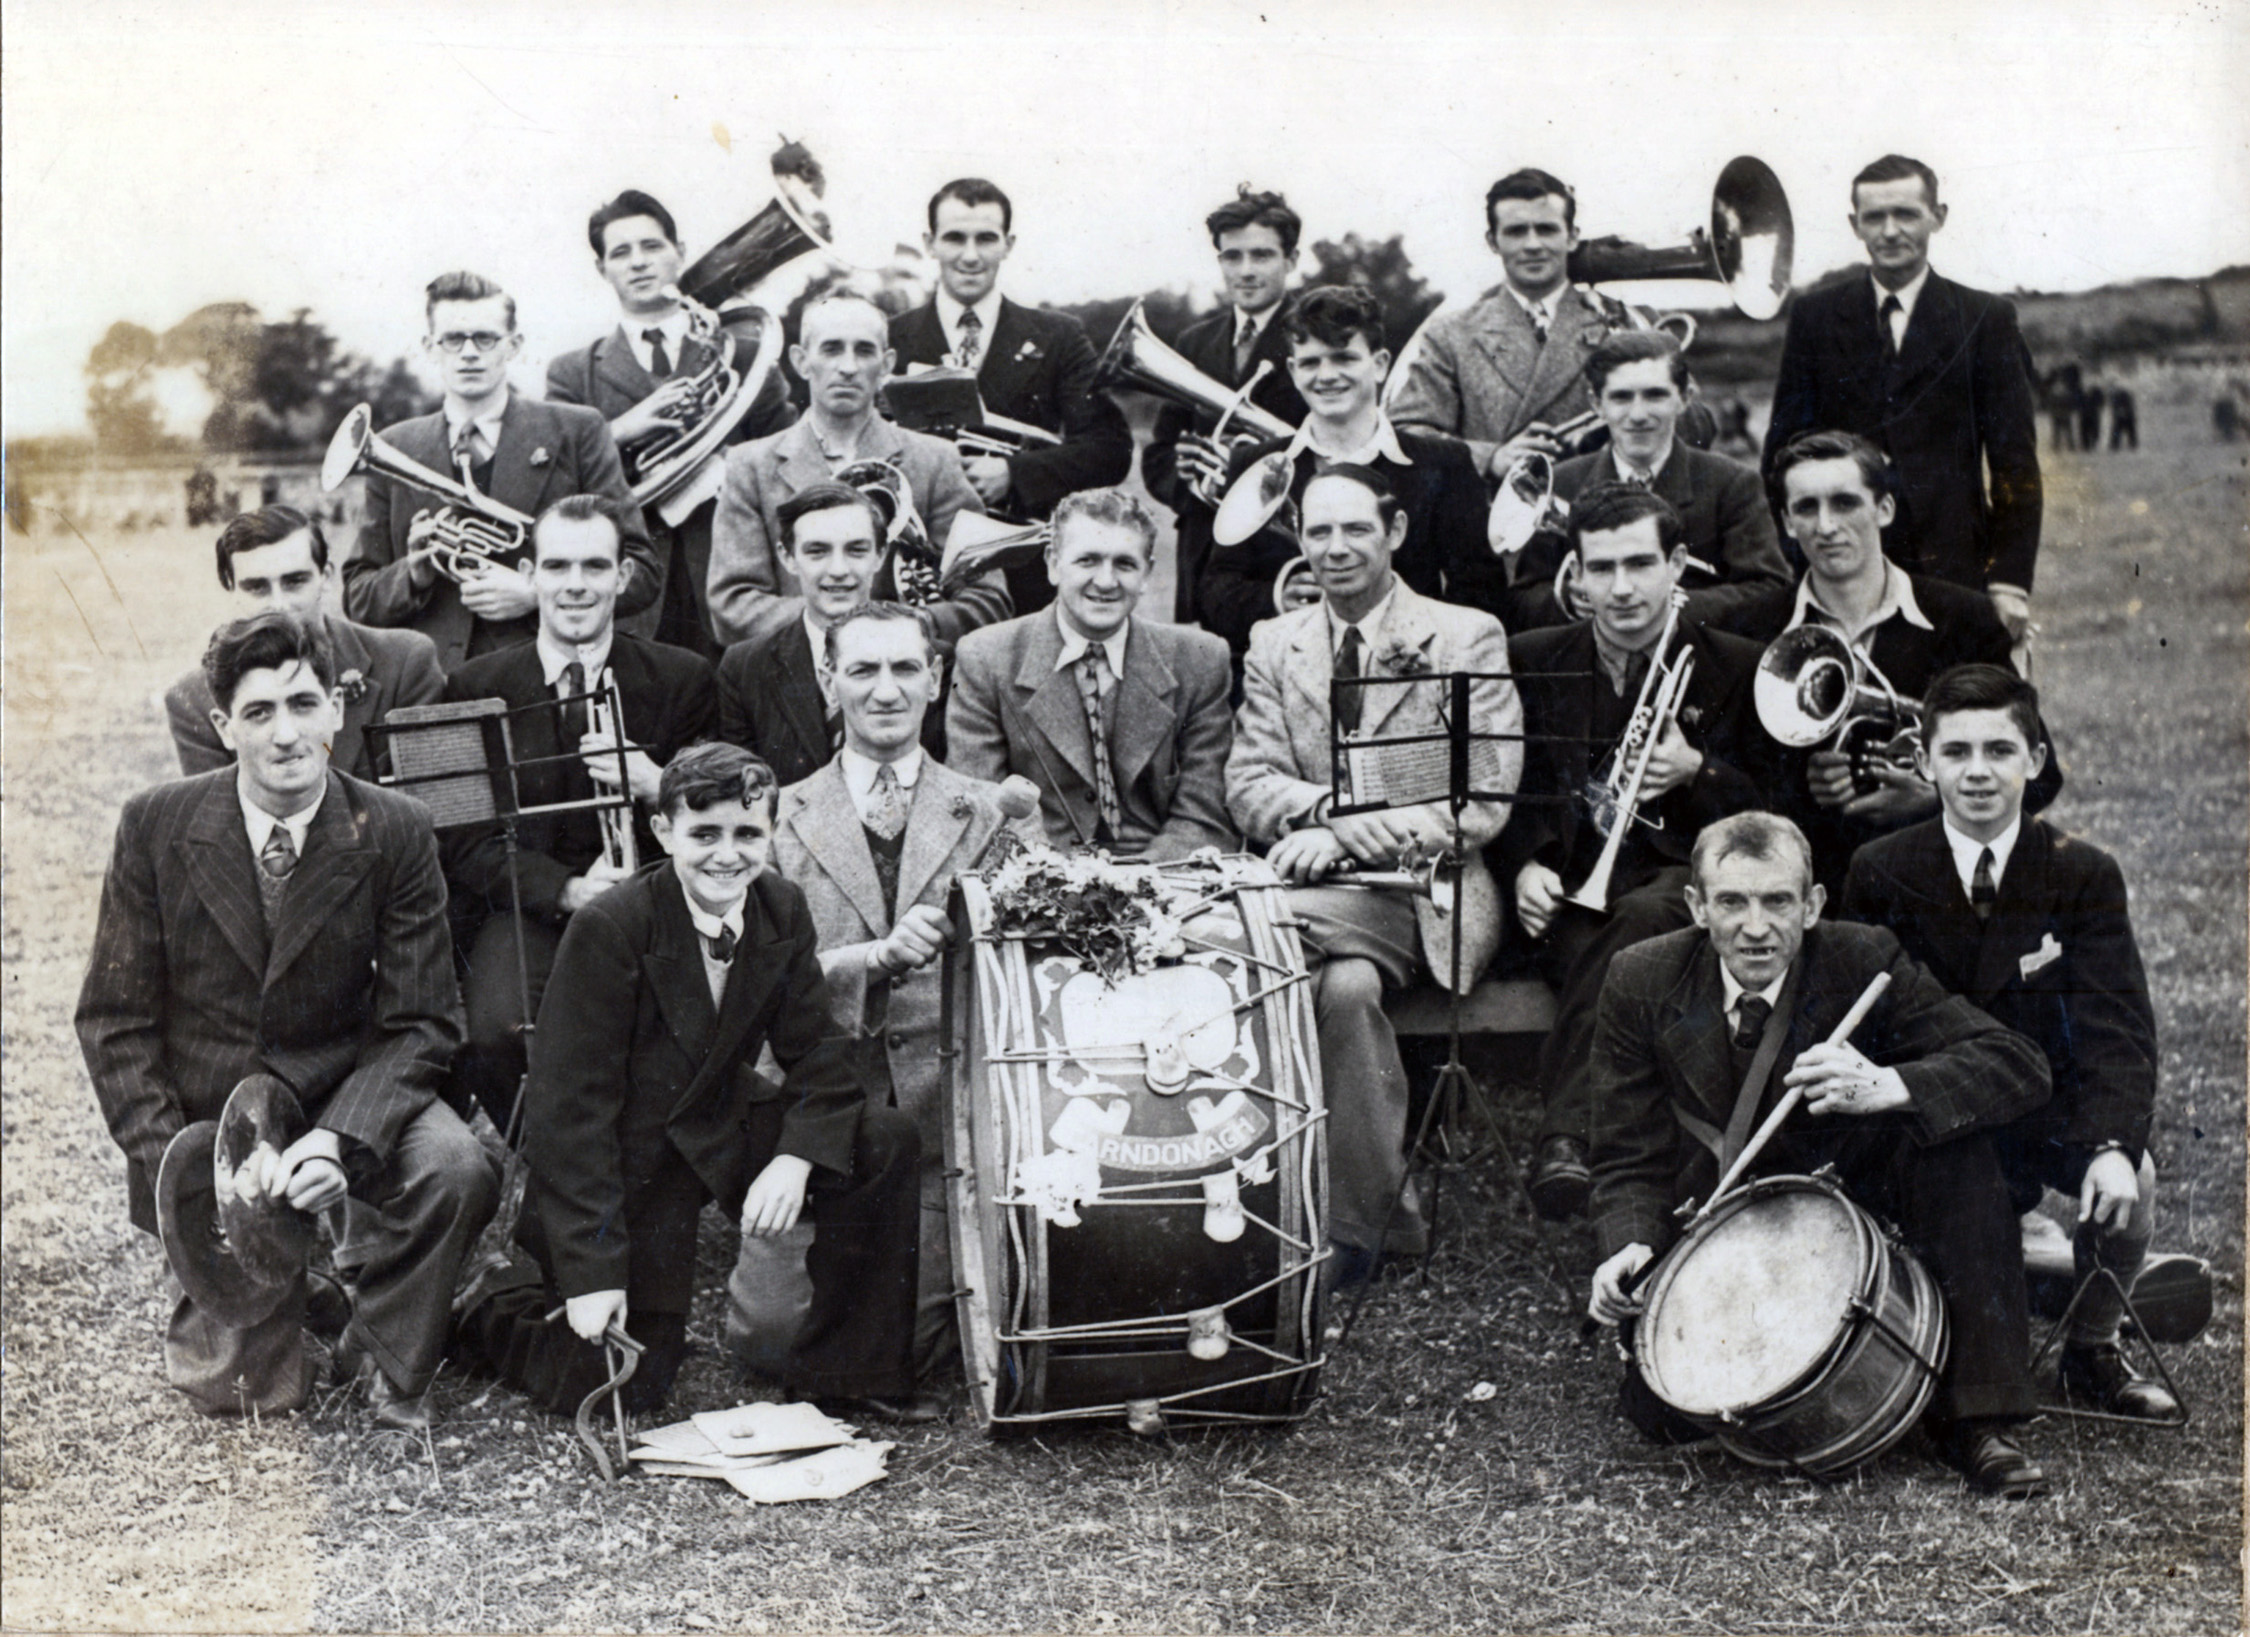 The Carndonagh Brass Band in the Showfield, Carndonagh, c. 1950